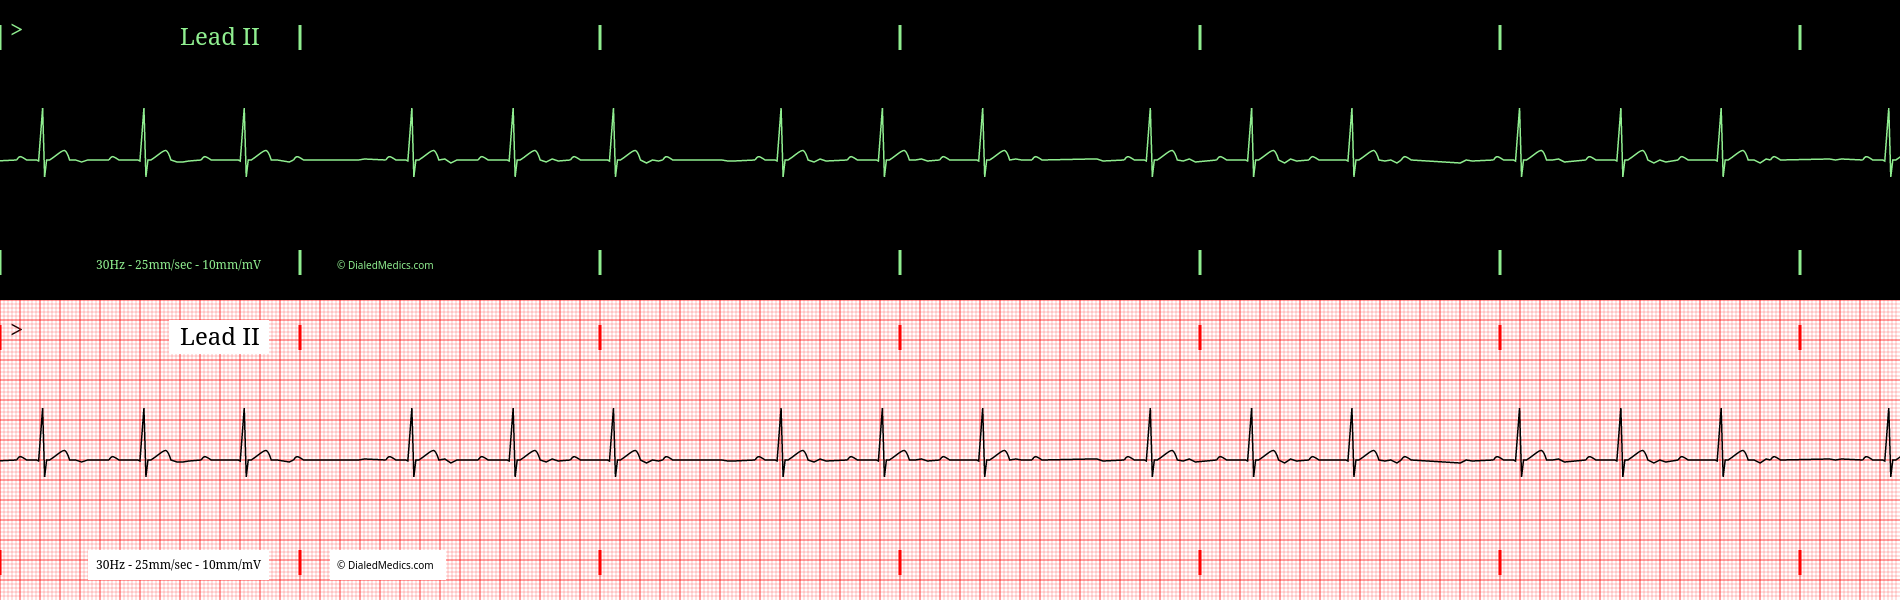 EKG Monitor capture and tracing printout of a Heart Block.